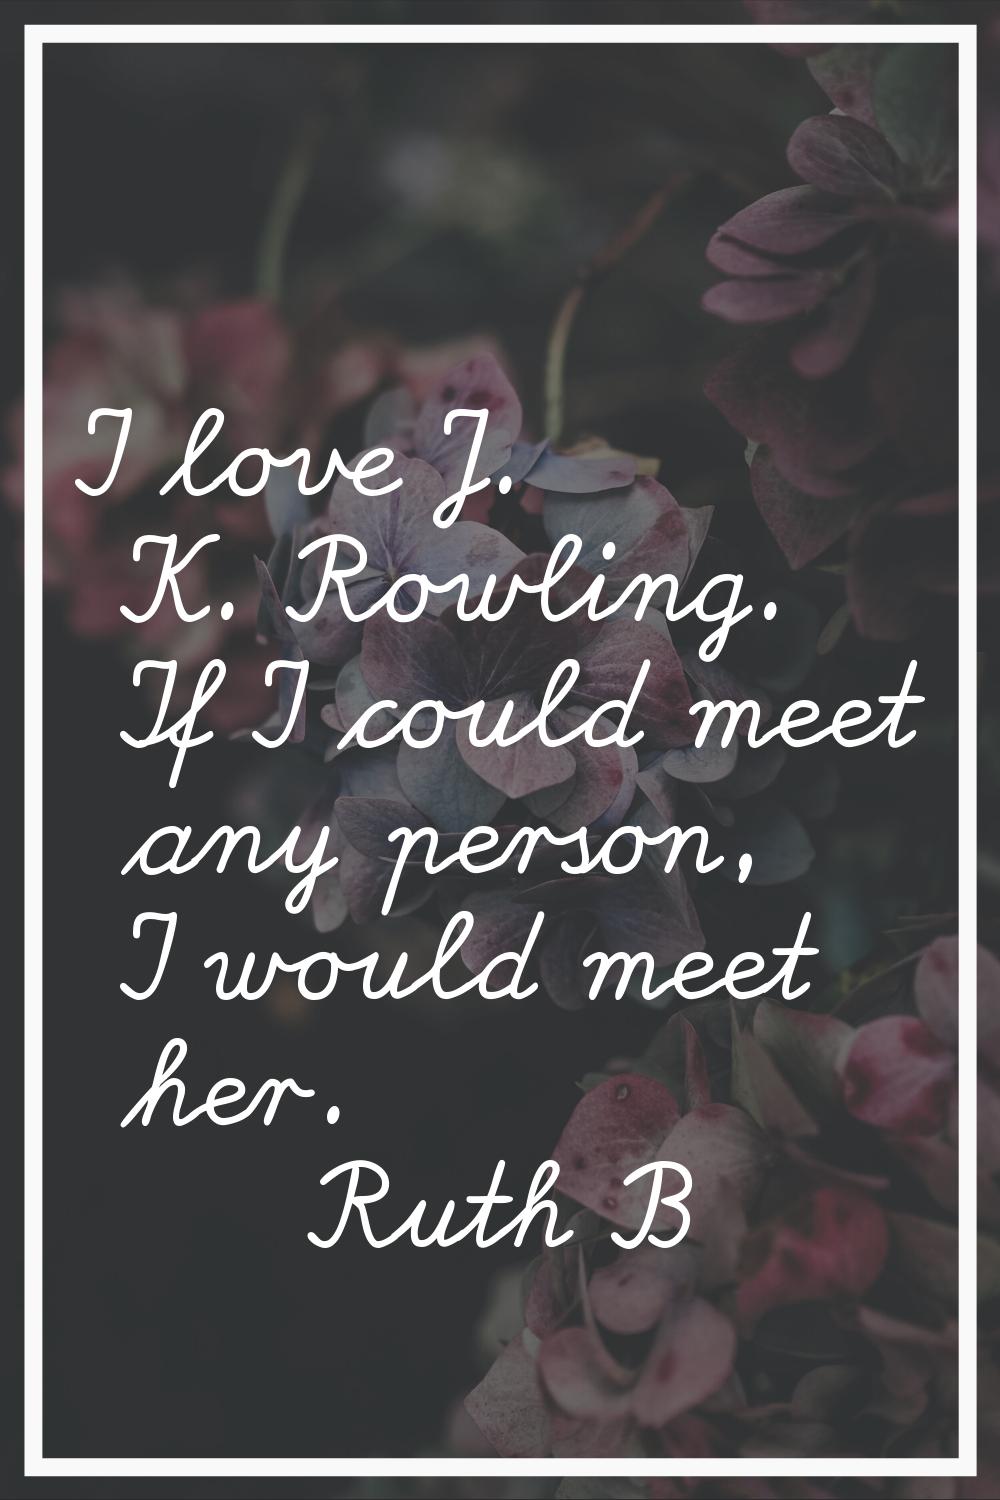 I love J. K. Rowling. If I could meet any person, I would meet her.